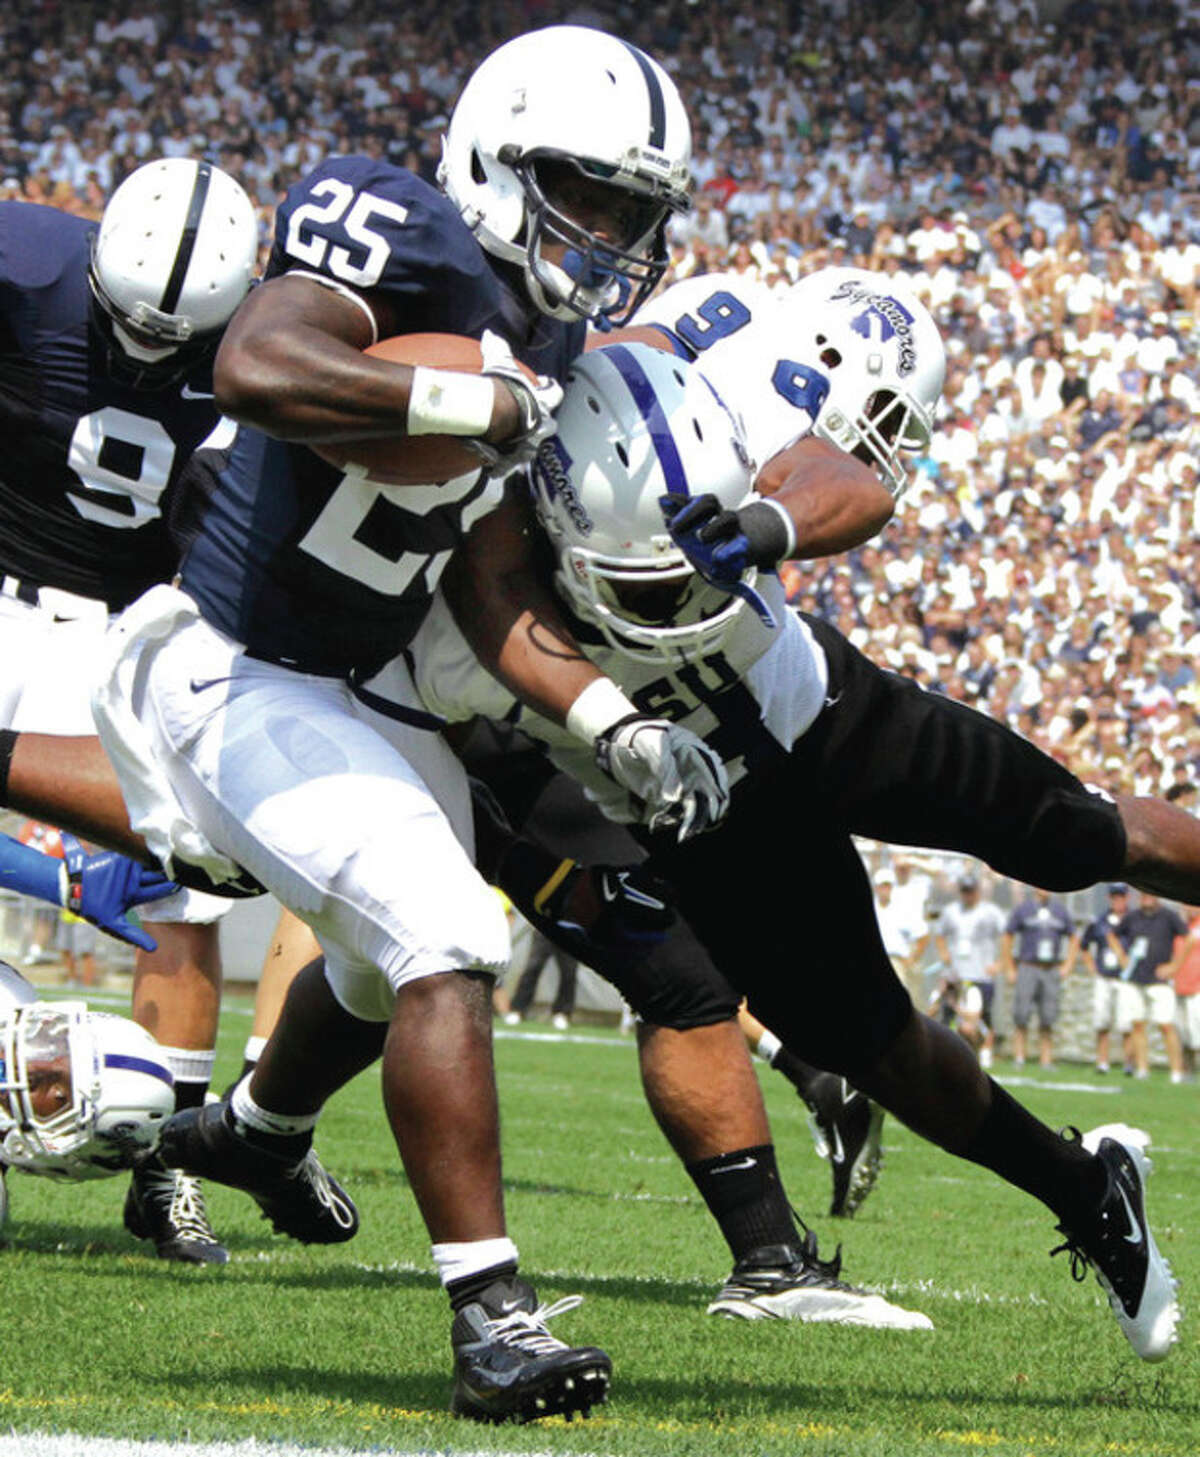 AP photo Penn State running back Silas Redd gets into the end zone for a touchdown past Indiana State defender Julian Easterly (6) during the first quarter of Saturday's game. A Norwalk resident, Redd ran for 104 yards and two TDs in Penn State's 41-7 win.